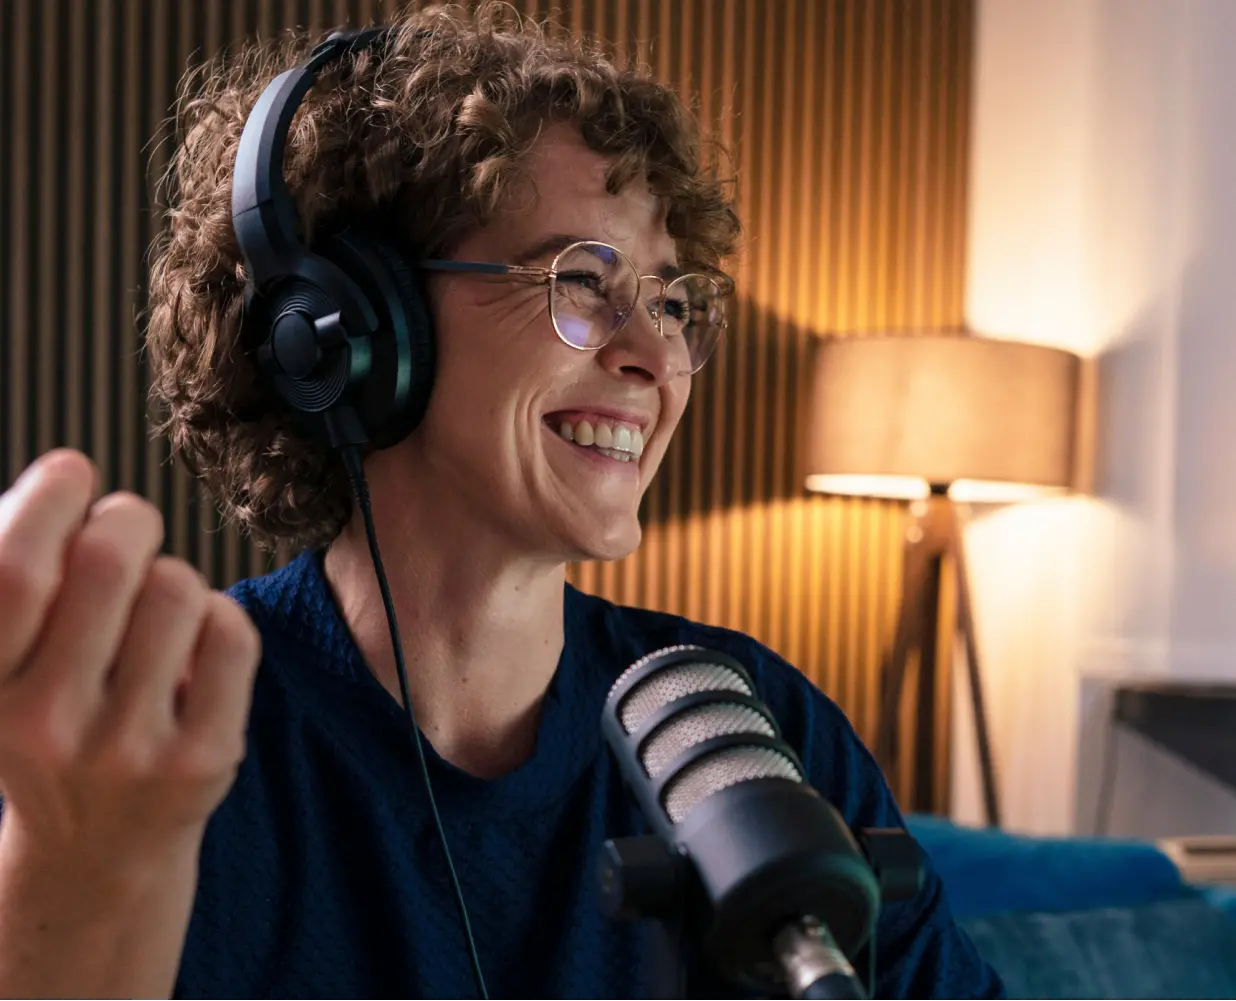 Woman smiling and speaking into a microphone, wearing headphones.